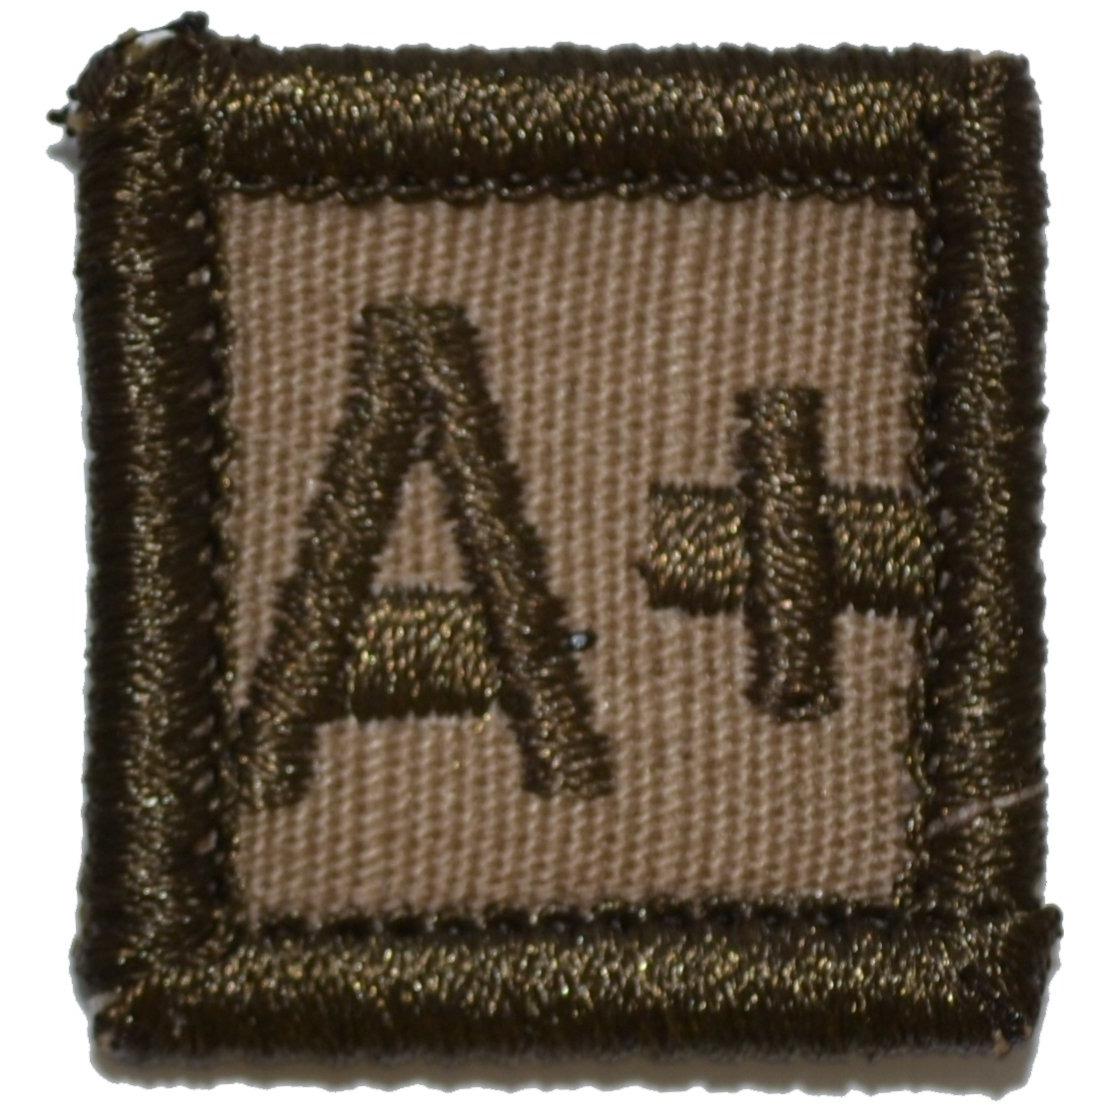 Blood Type Patch 1x1, A+